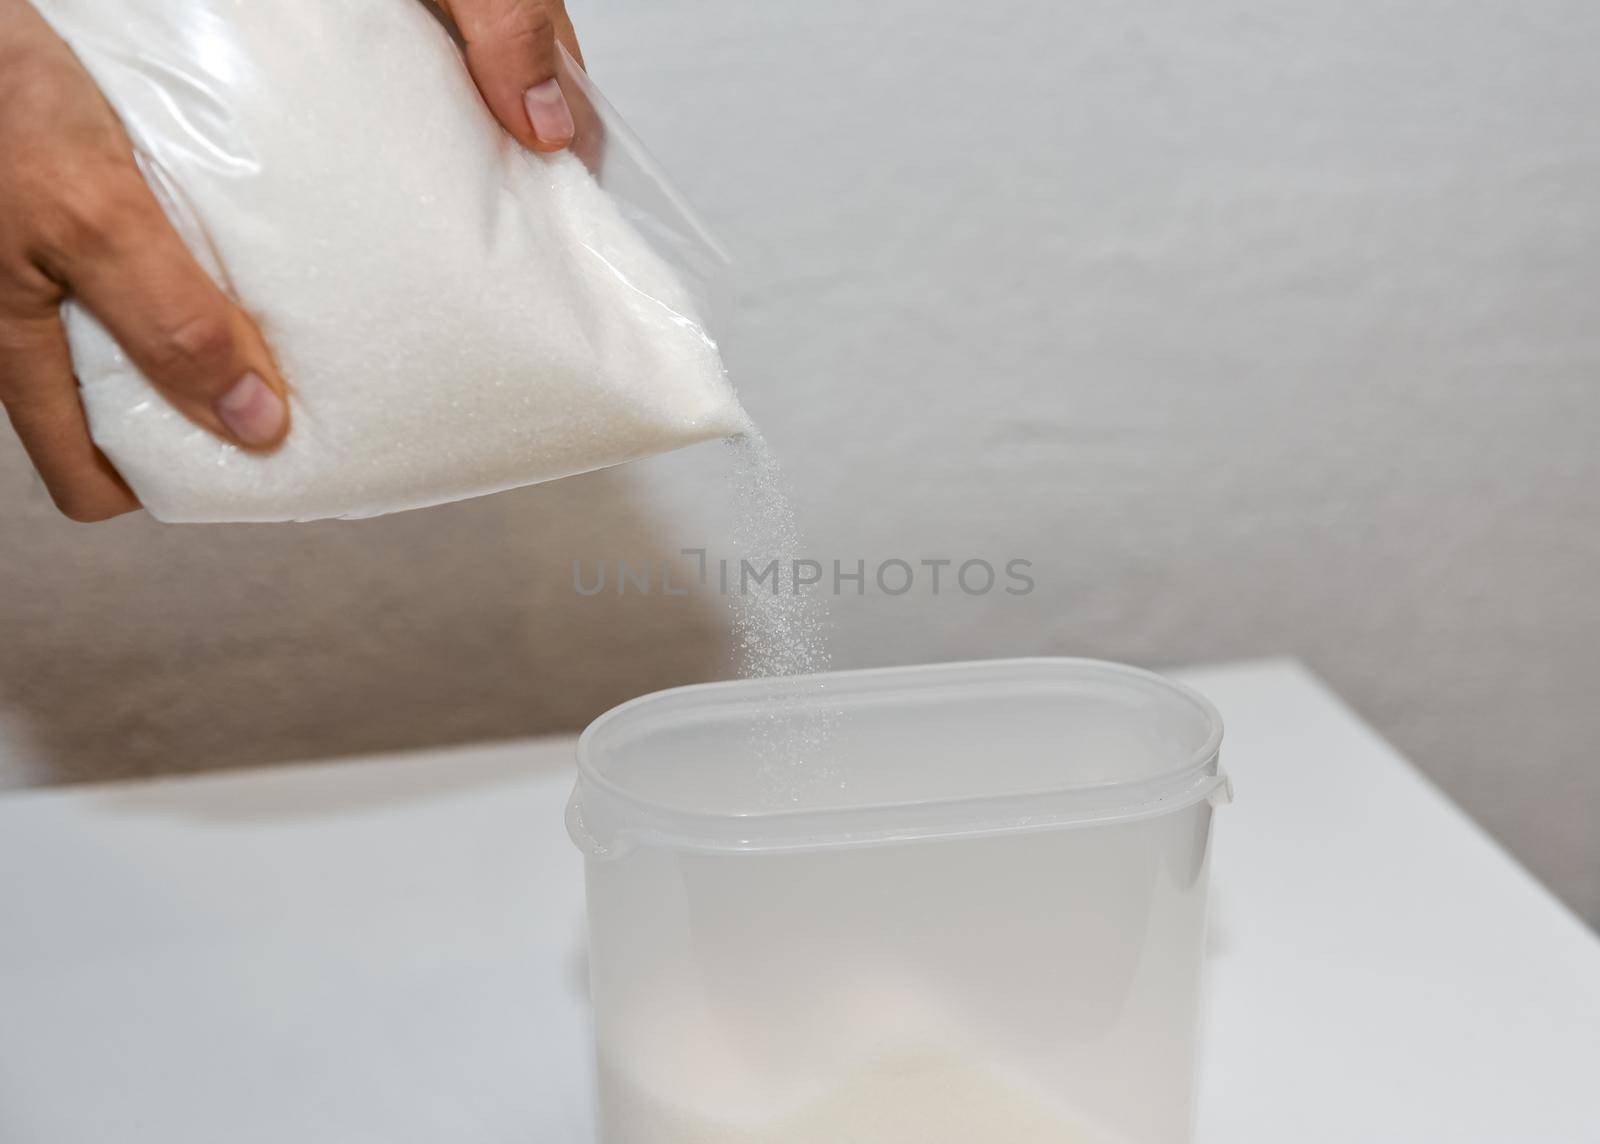 Storing sugar at home, arranging a place in the kitchen. Pouring sugar from a bag into a plastic container.